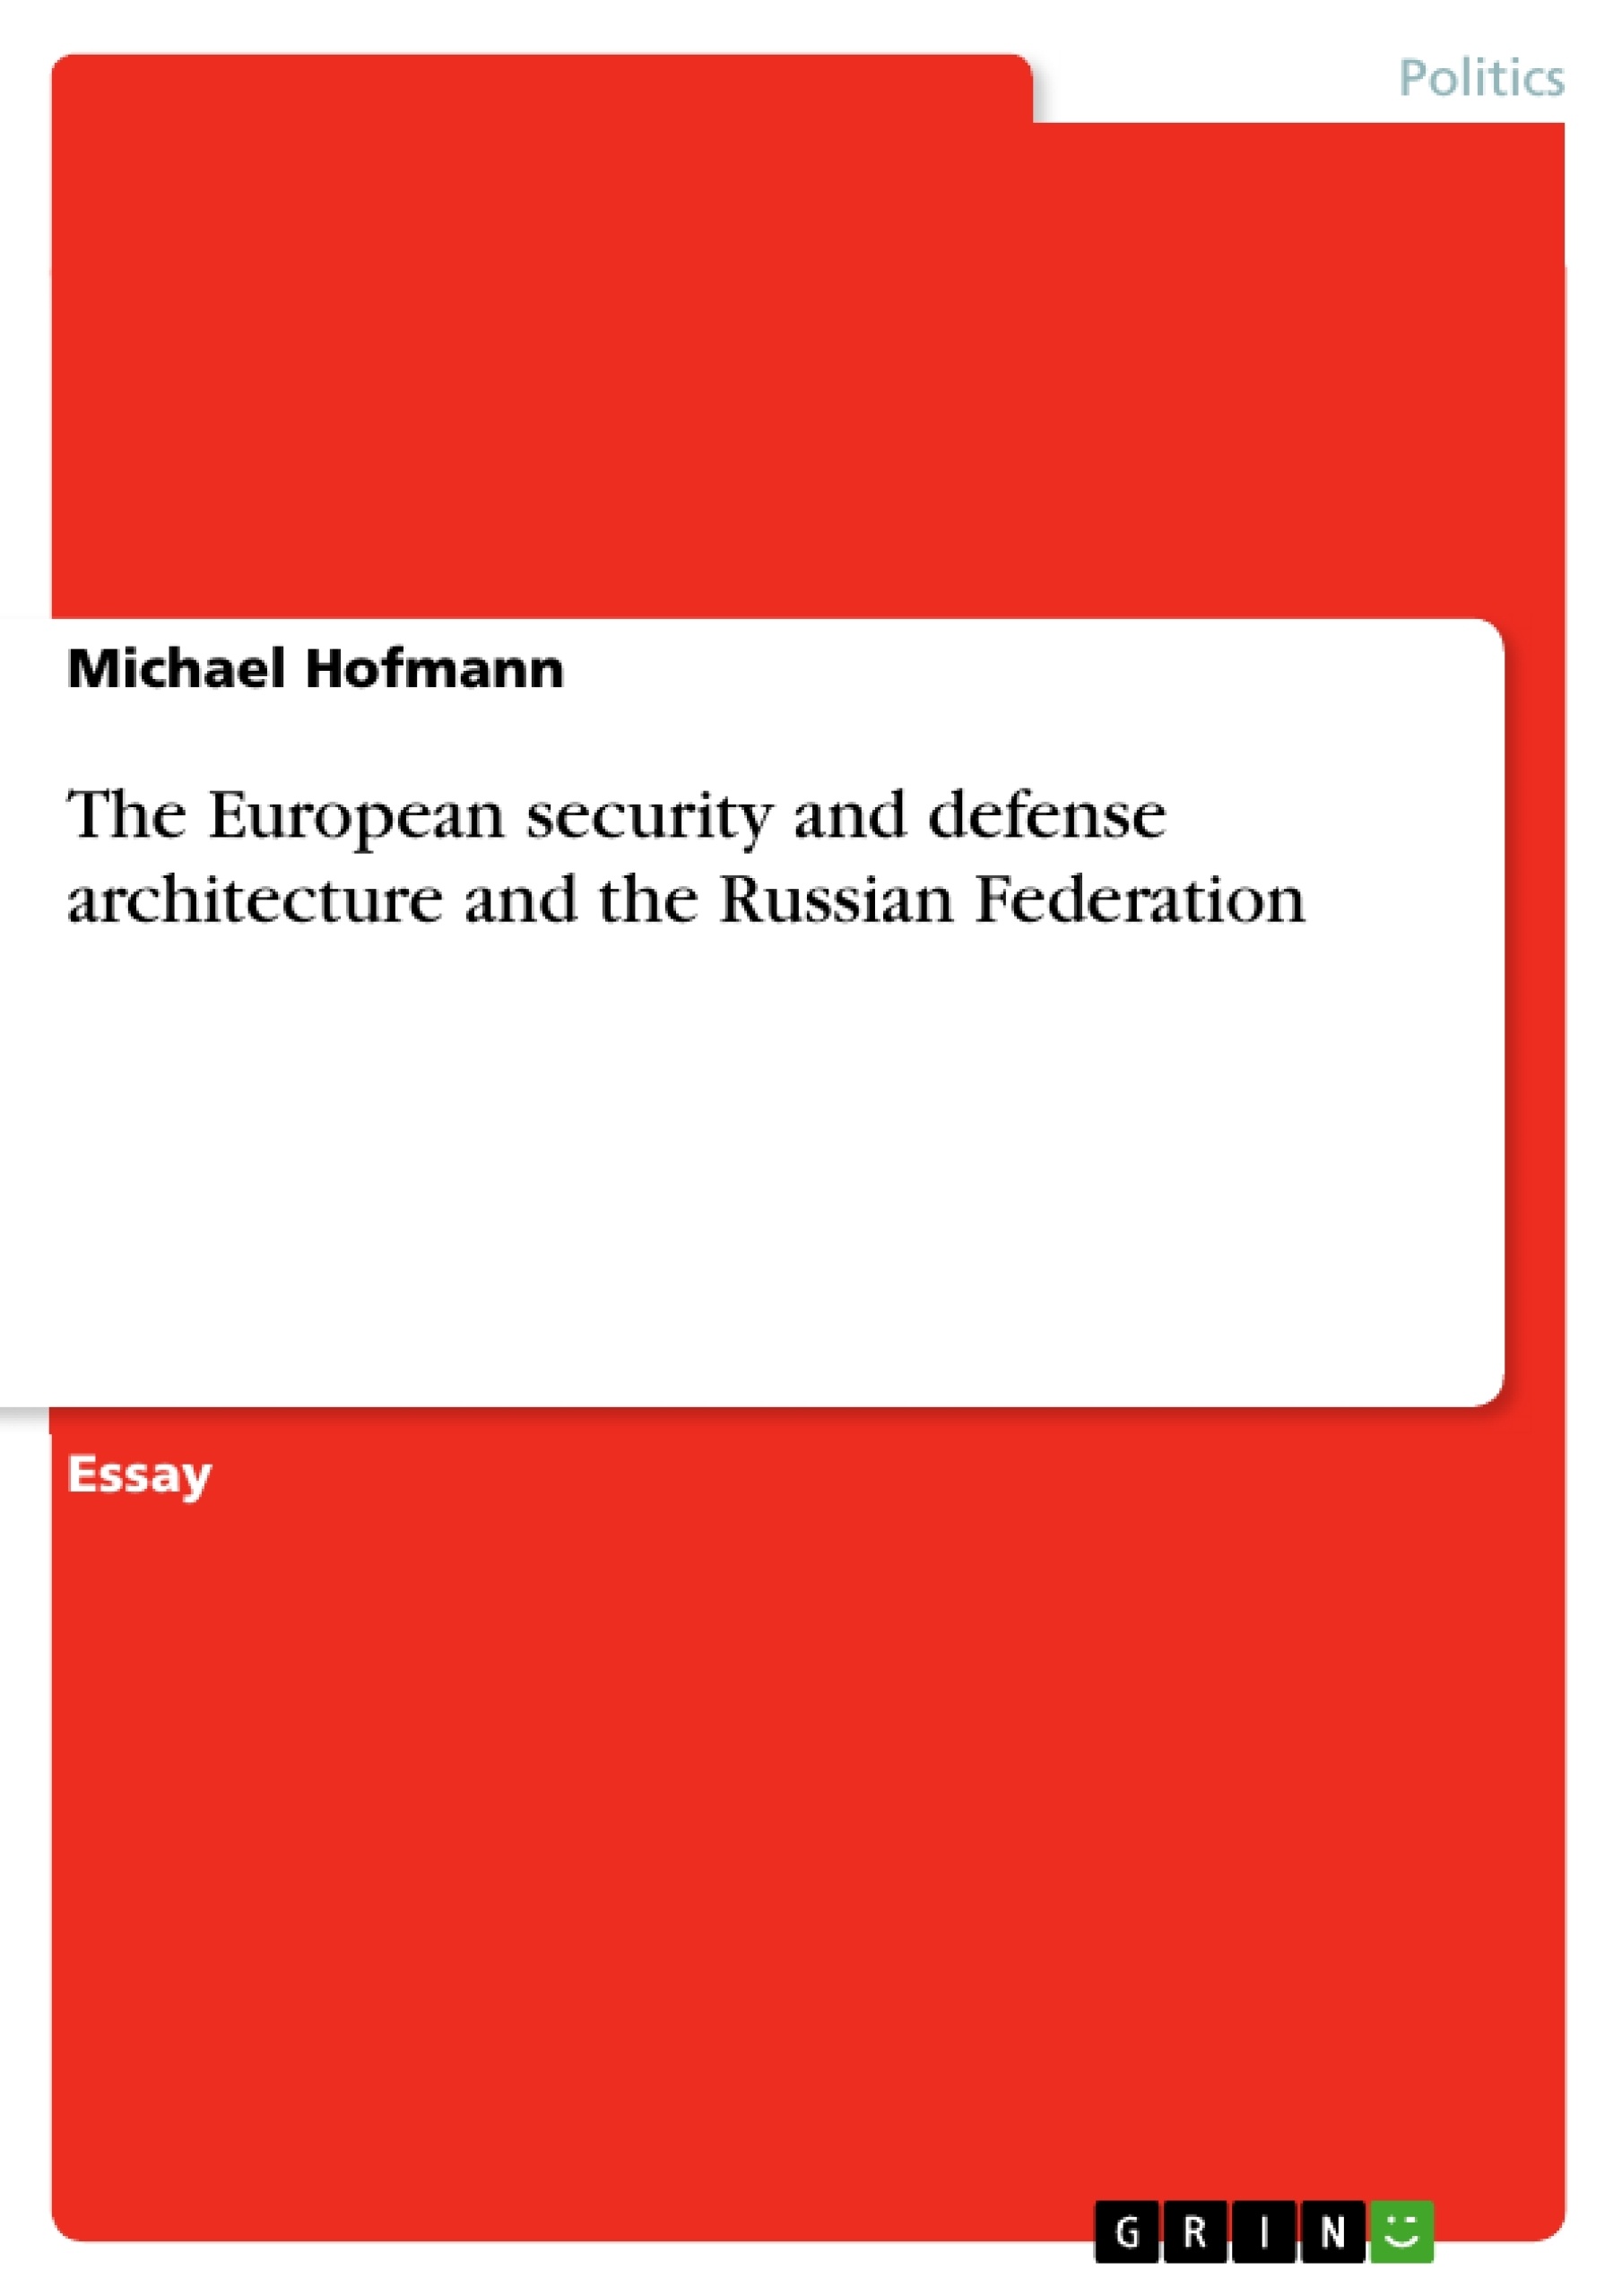 Título: The European security and defense architecture and the Russian Federation